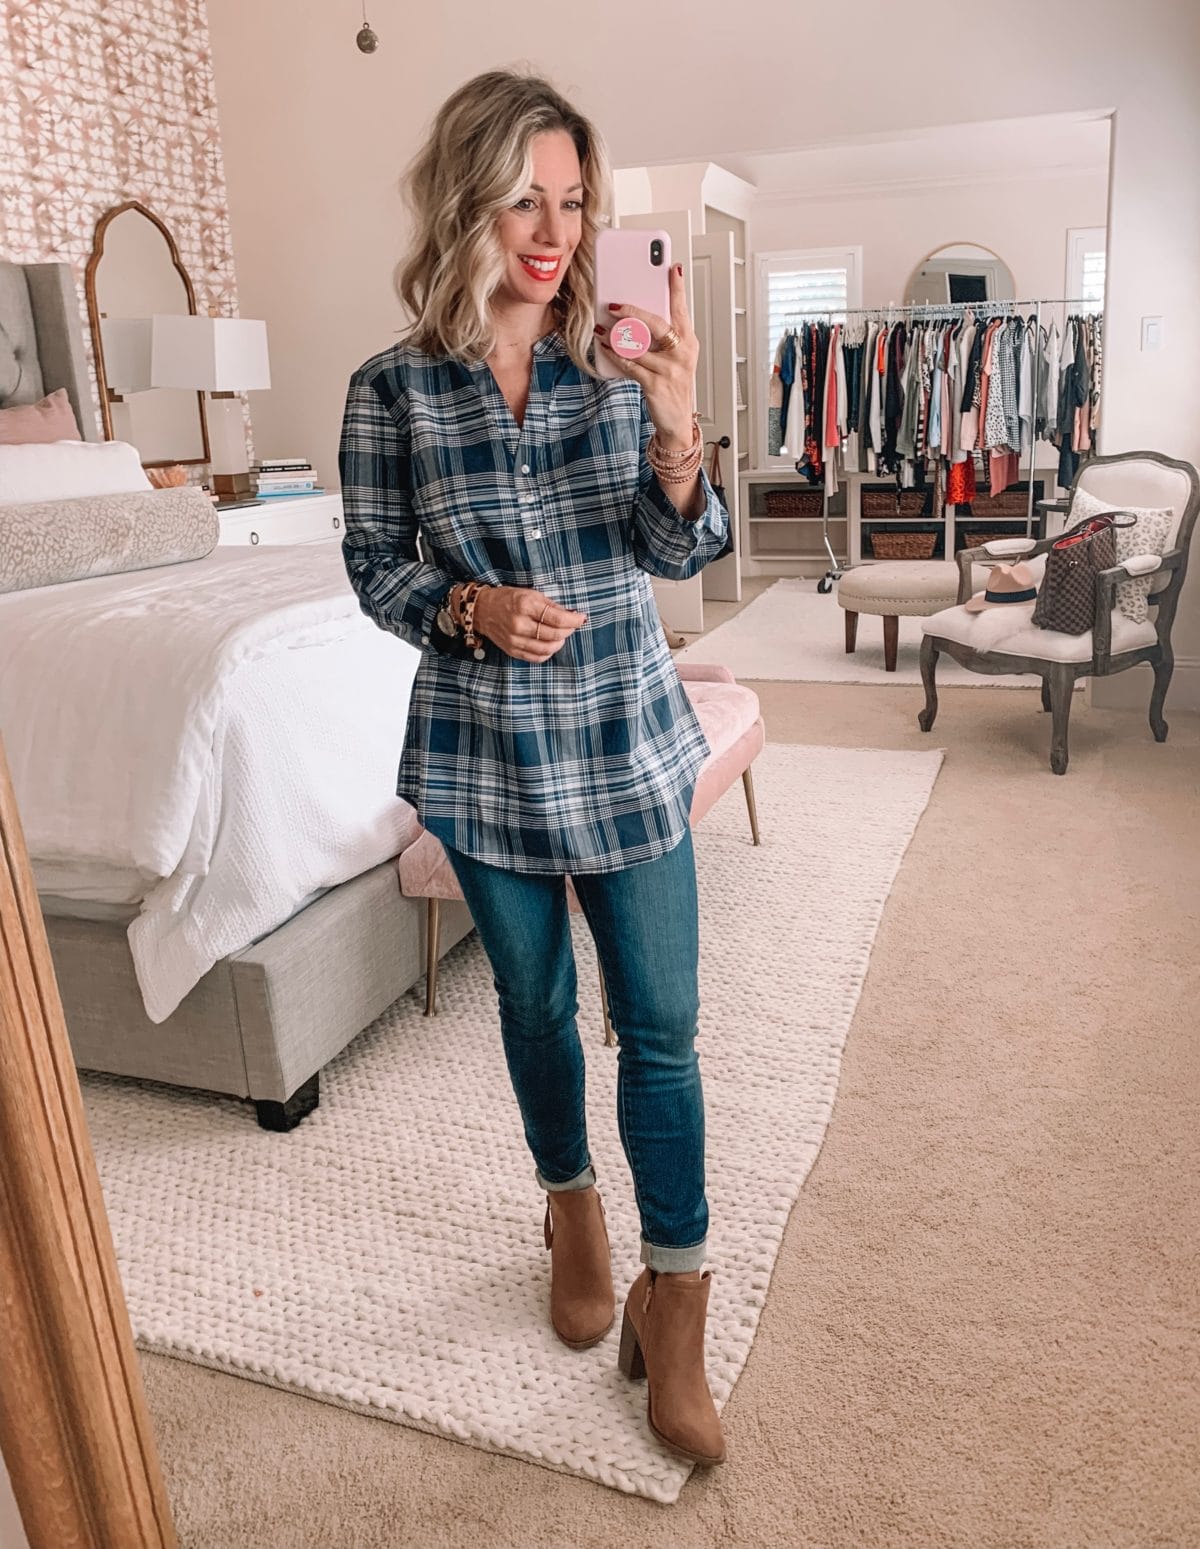 Amazon Prime Fashion- Plaid Top and Jeans 